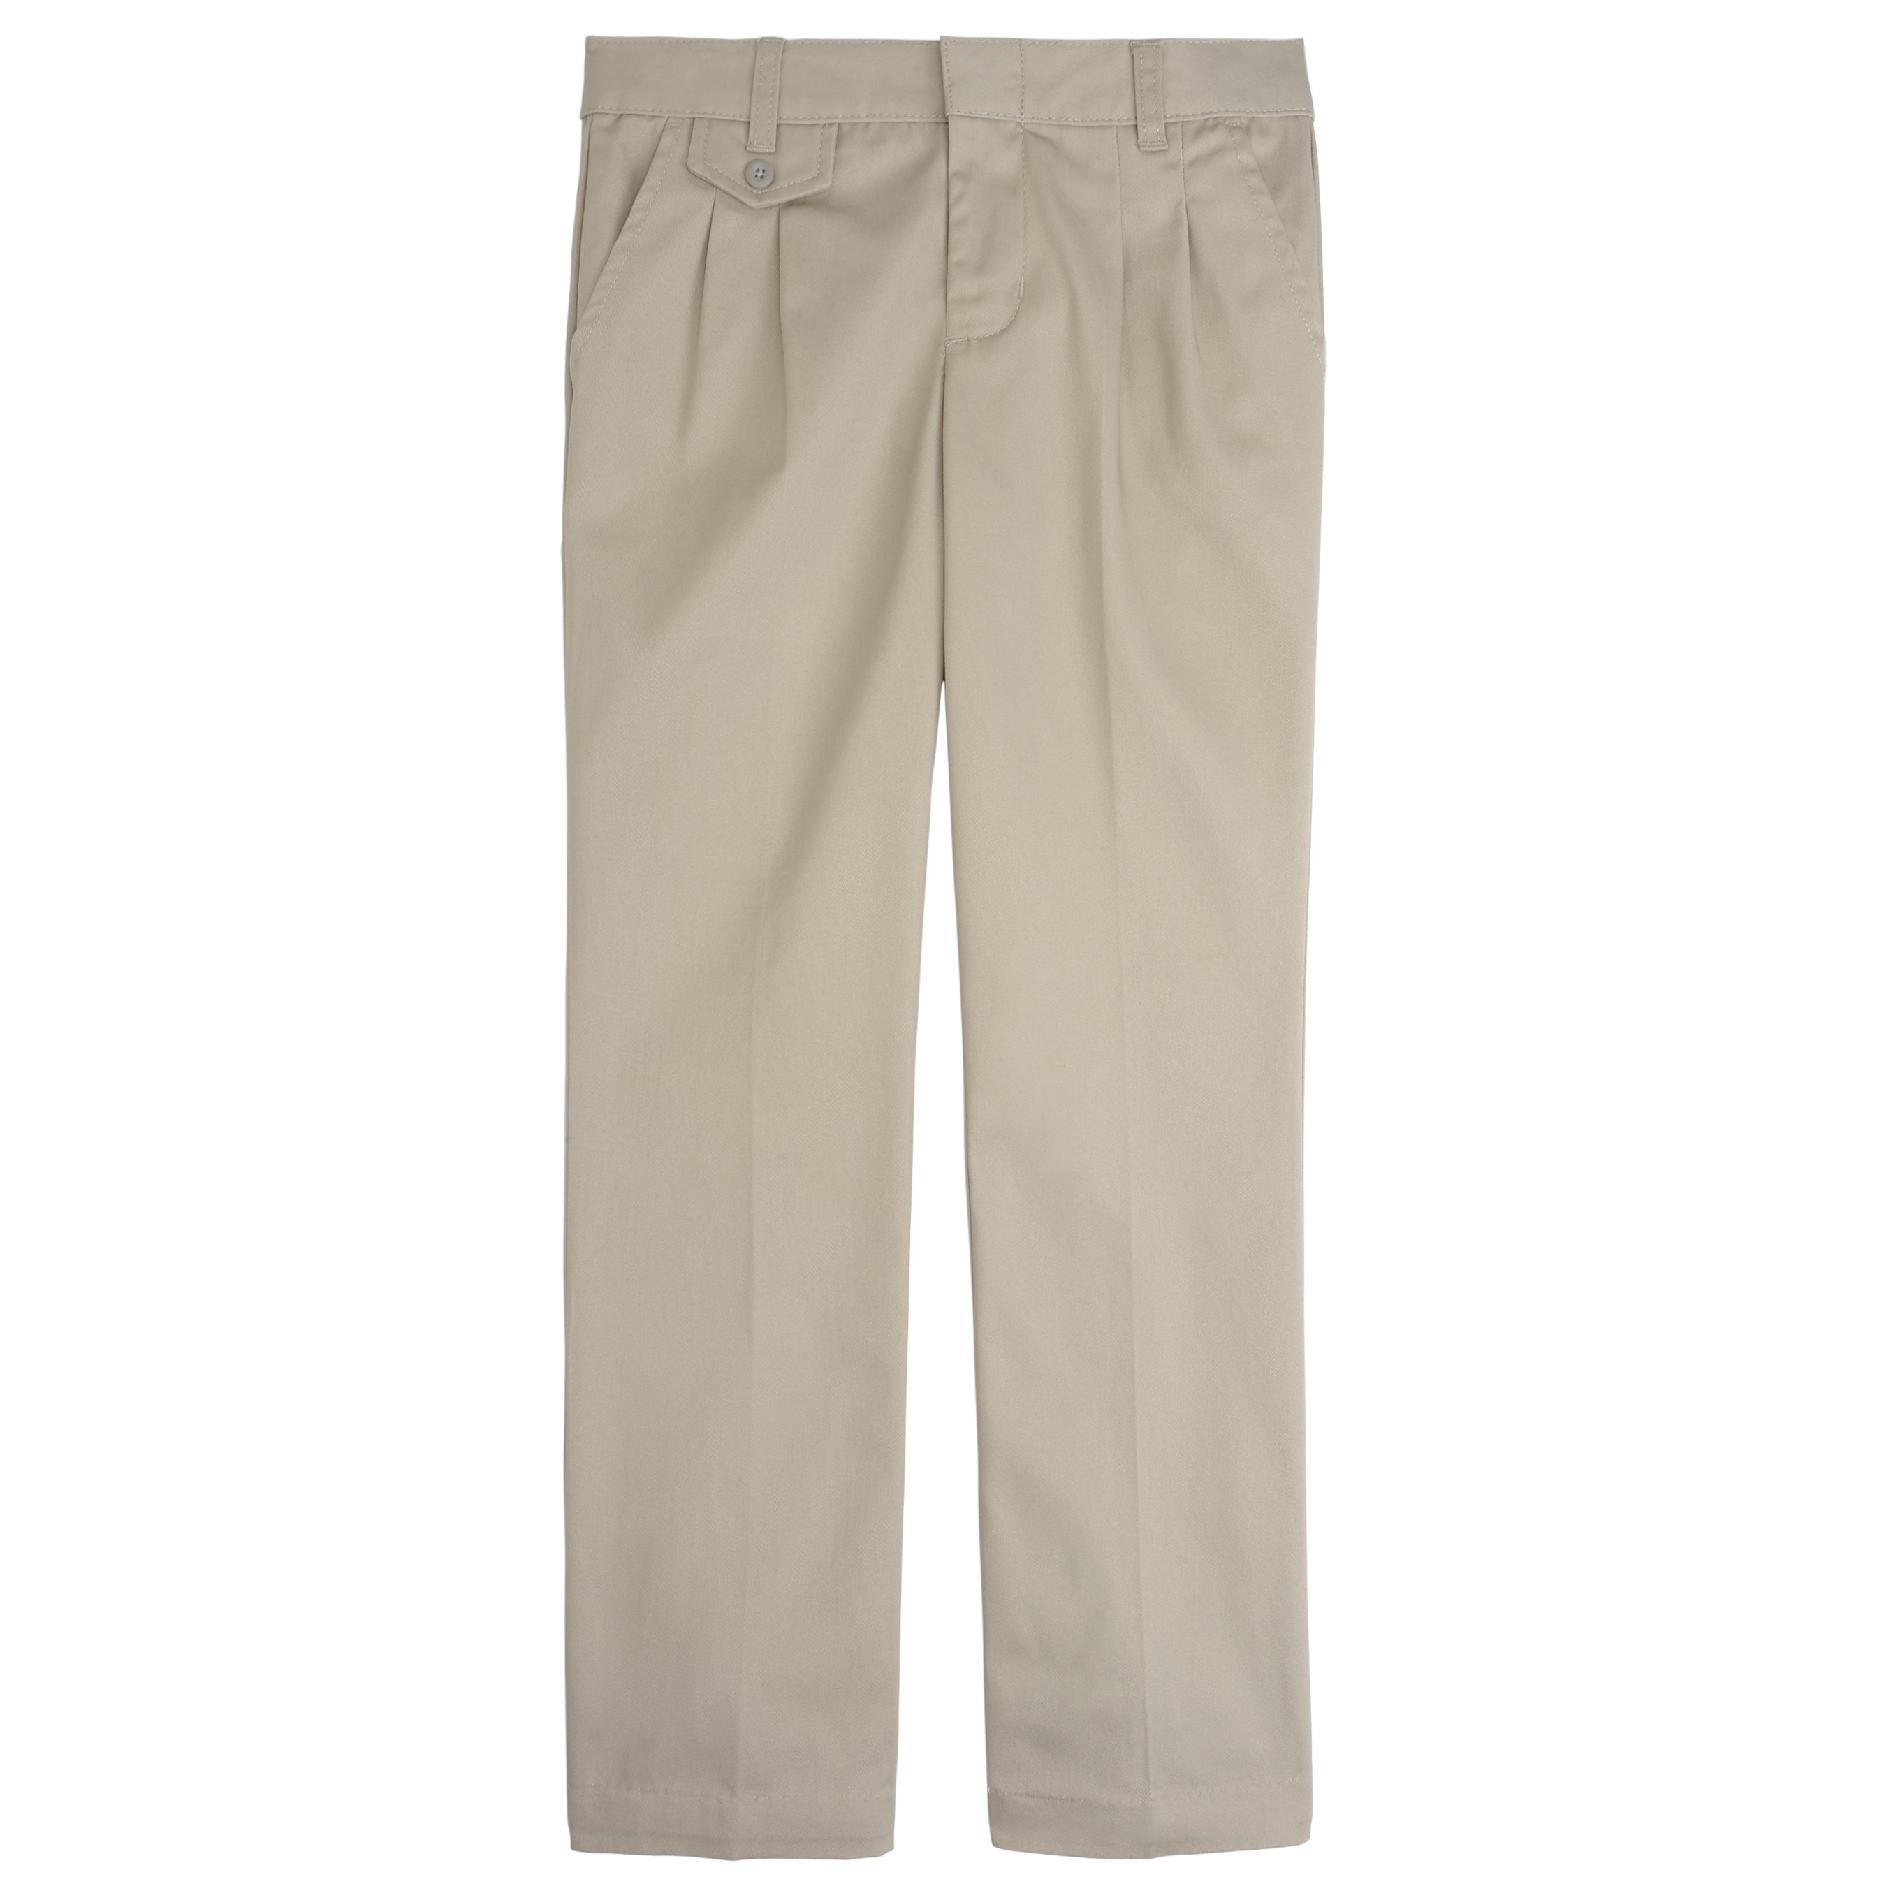 At School by French Toast Girls Plus Adjustable Waist Pleated Pant